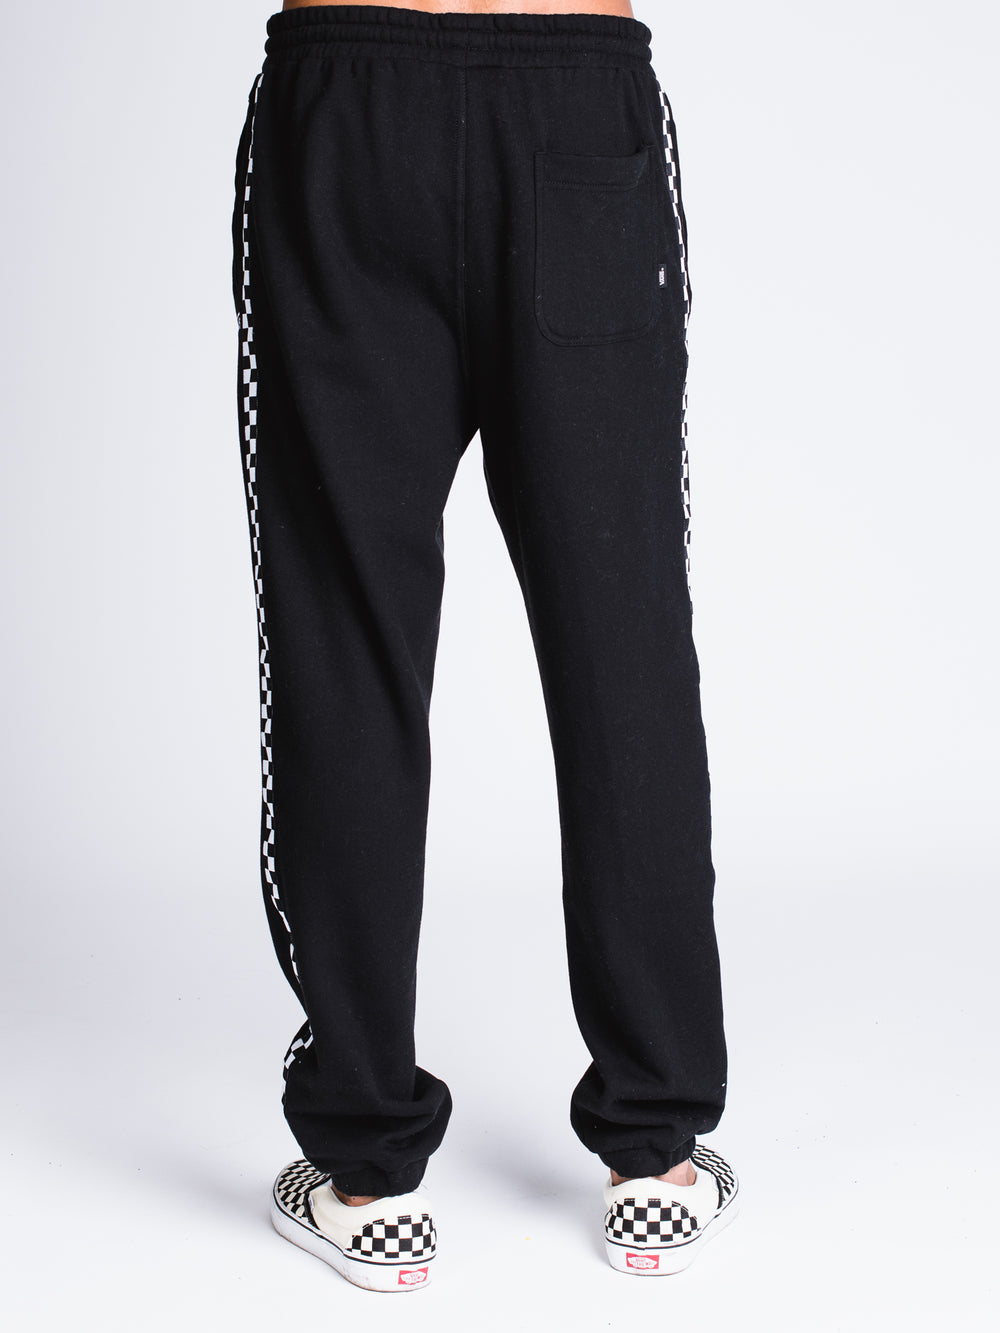 MENS CHECKER TAPING FLEECE PANT - BLK - CLEARANCE